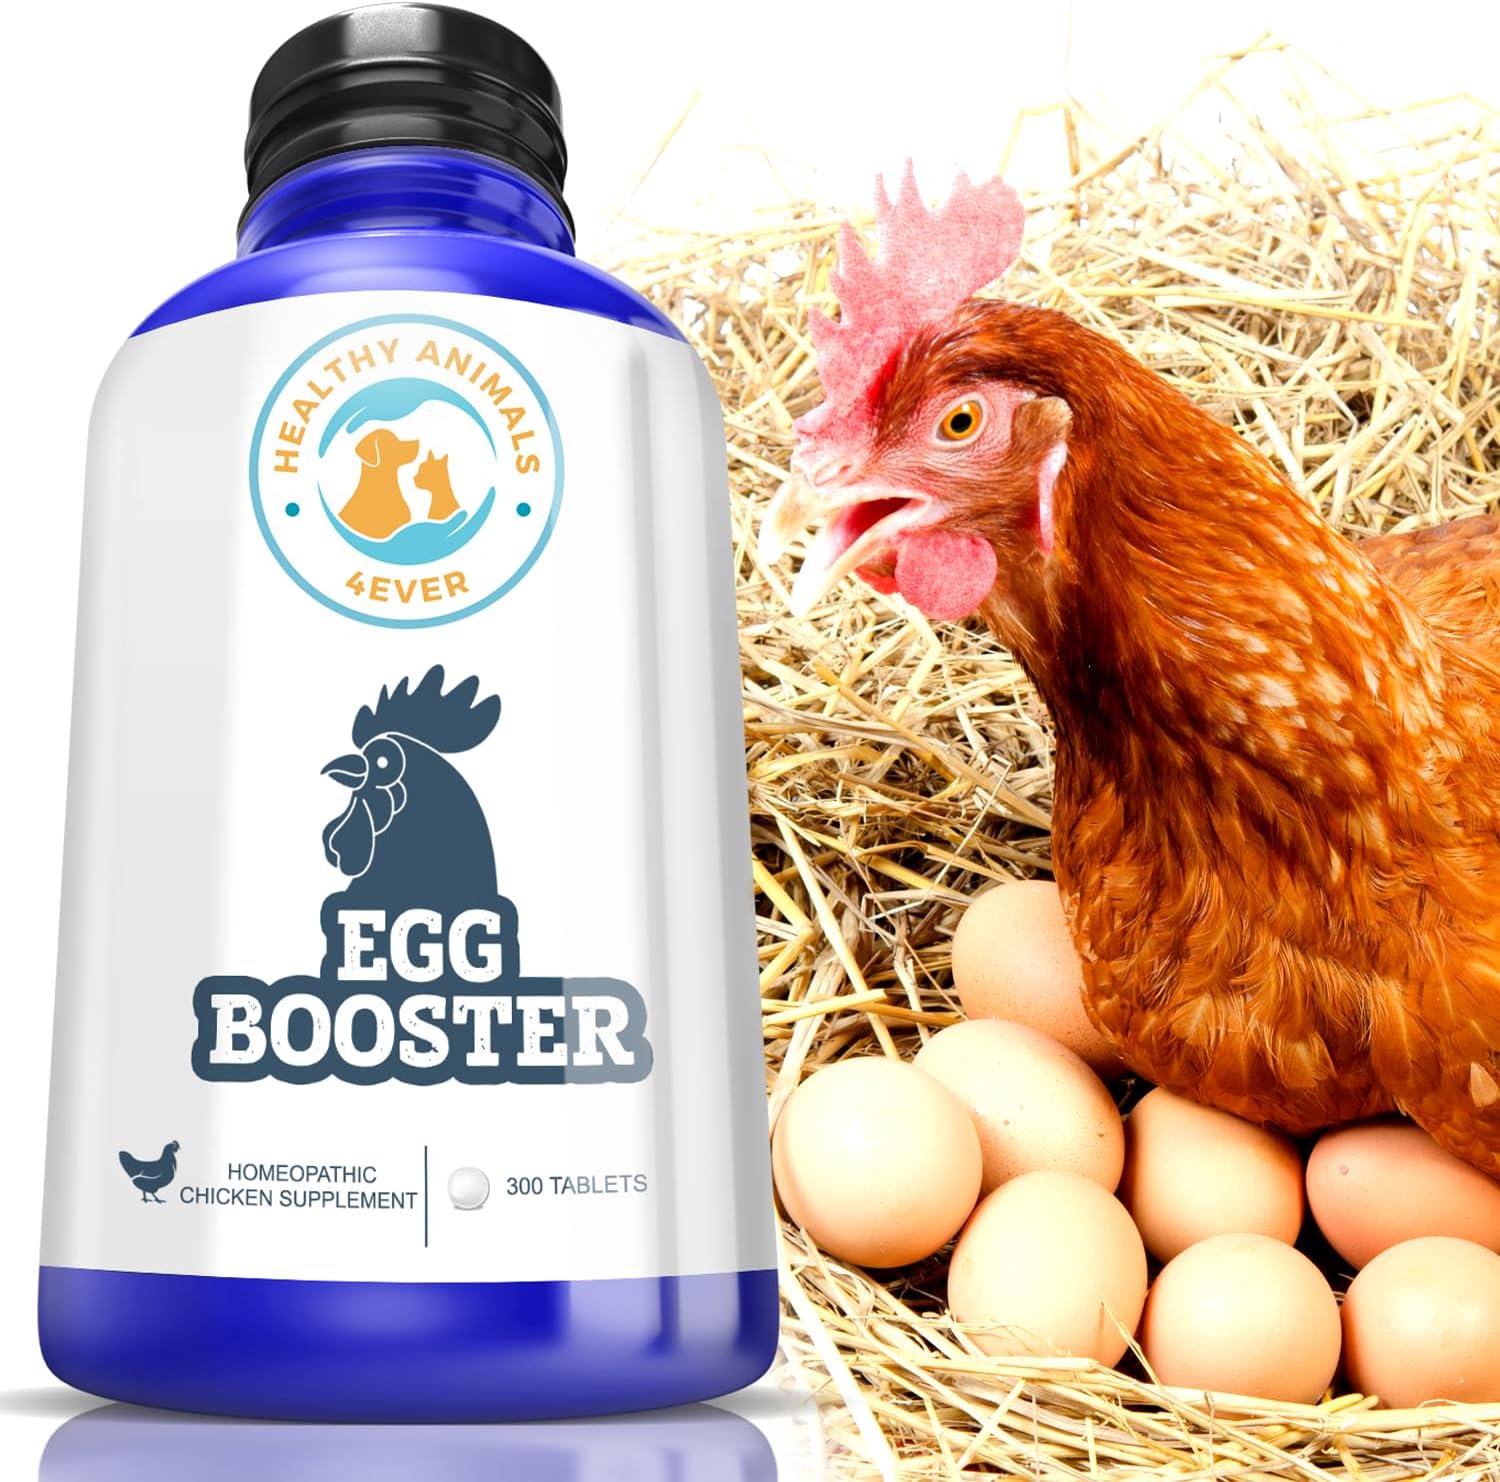 All-Natural Chicken Egg Booster Supplement - Natural Stress Relief to Promote Stronger Eggshells - Homeopathic & Highly Effective - 300 Chicken Egg Strengthening Tablets